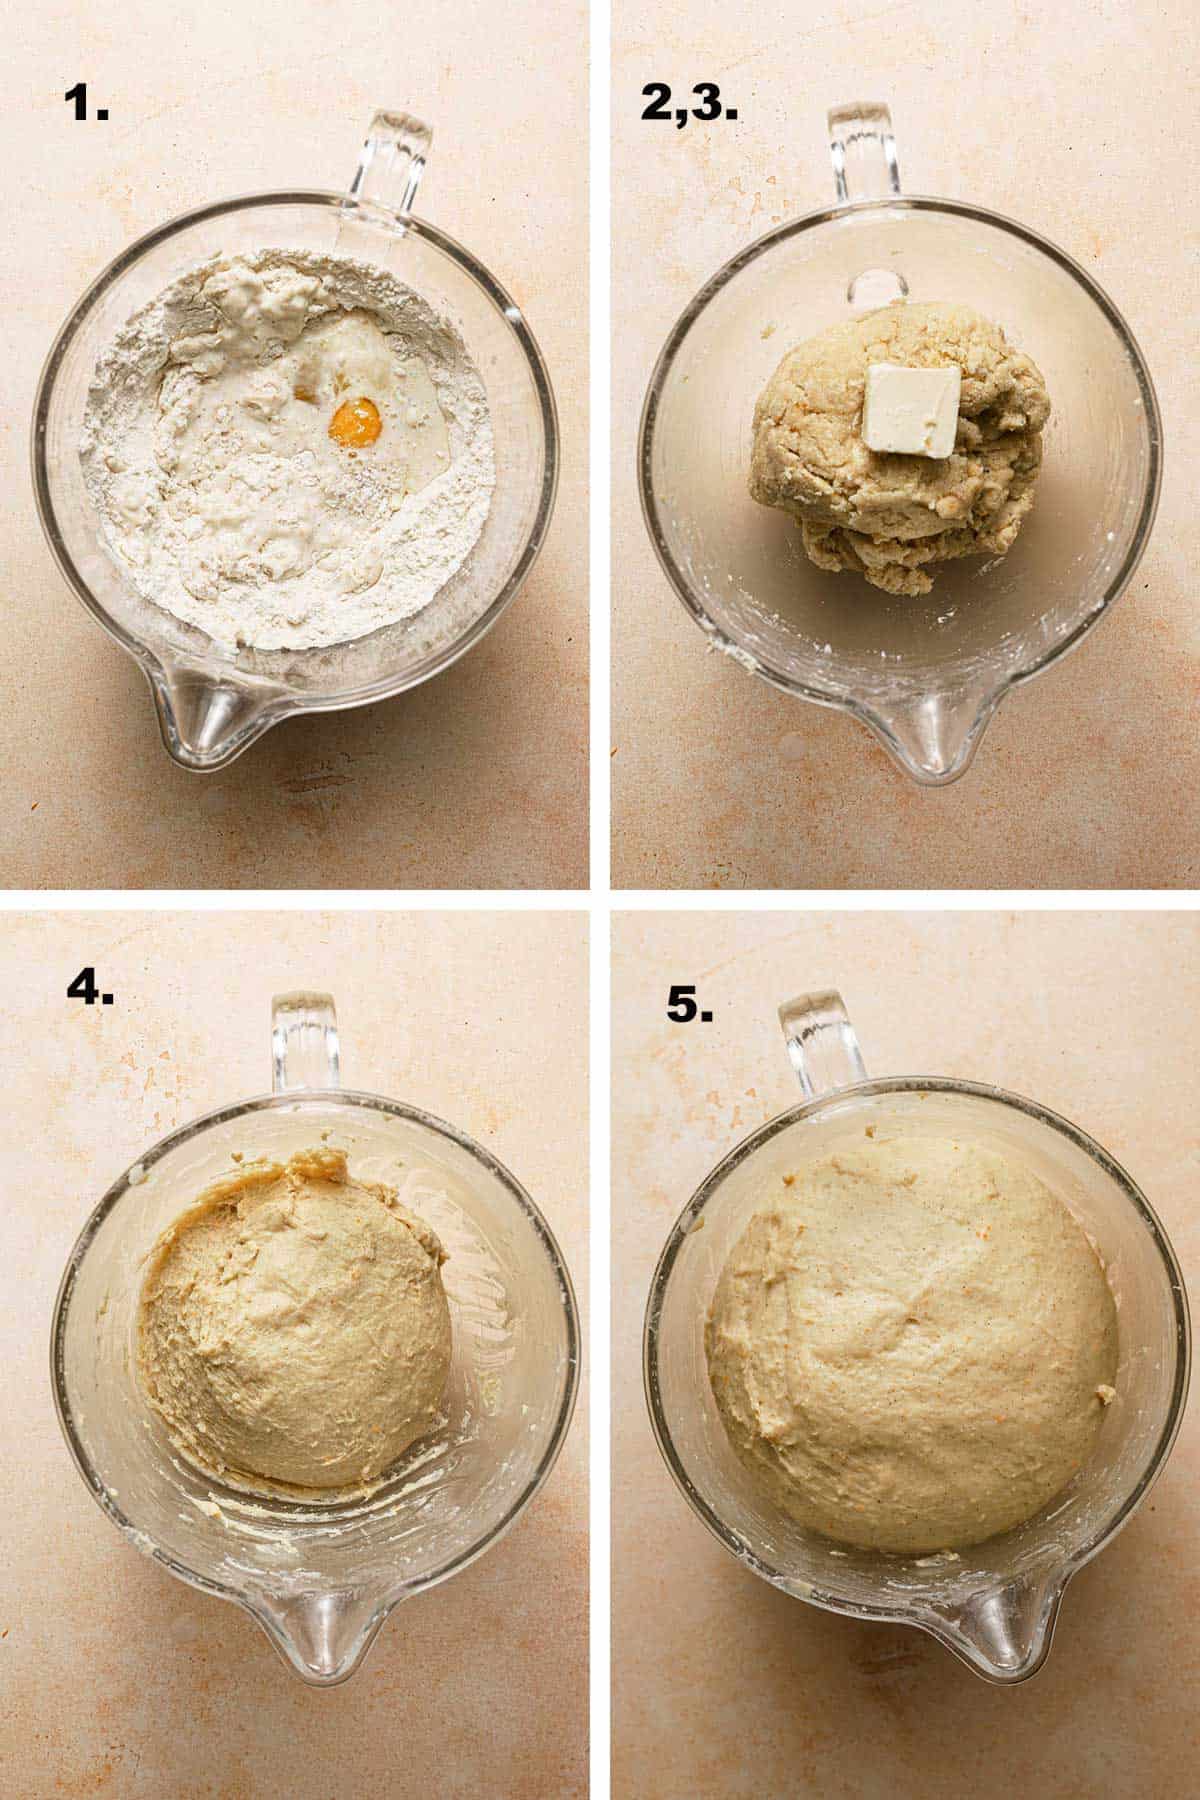 steps on How to make cardamom buns dough. Mixing the ingredients, adding butter, and resting the dough.